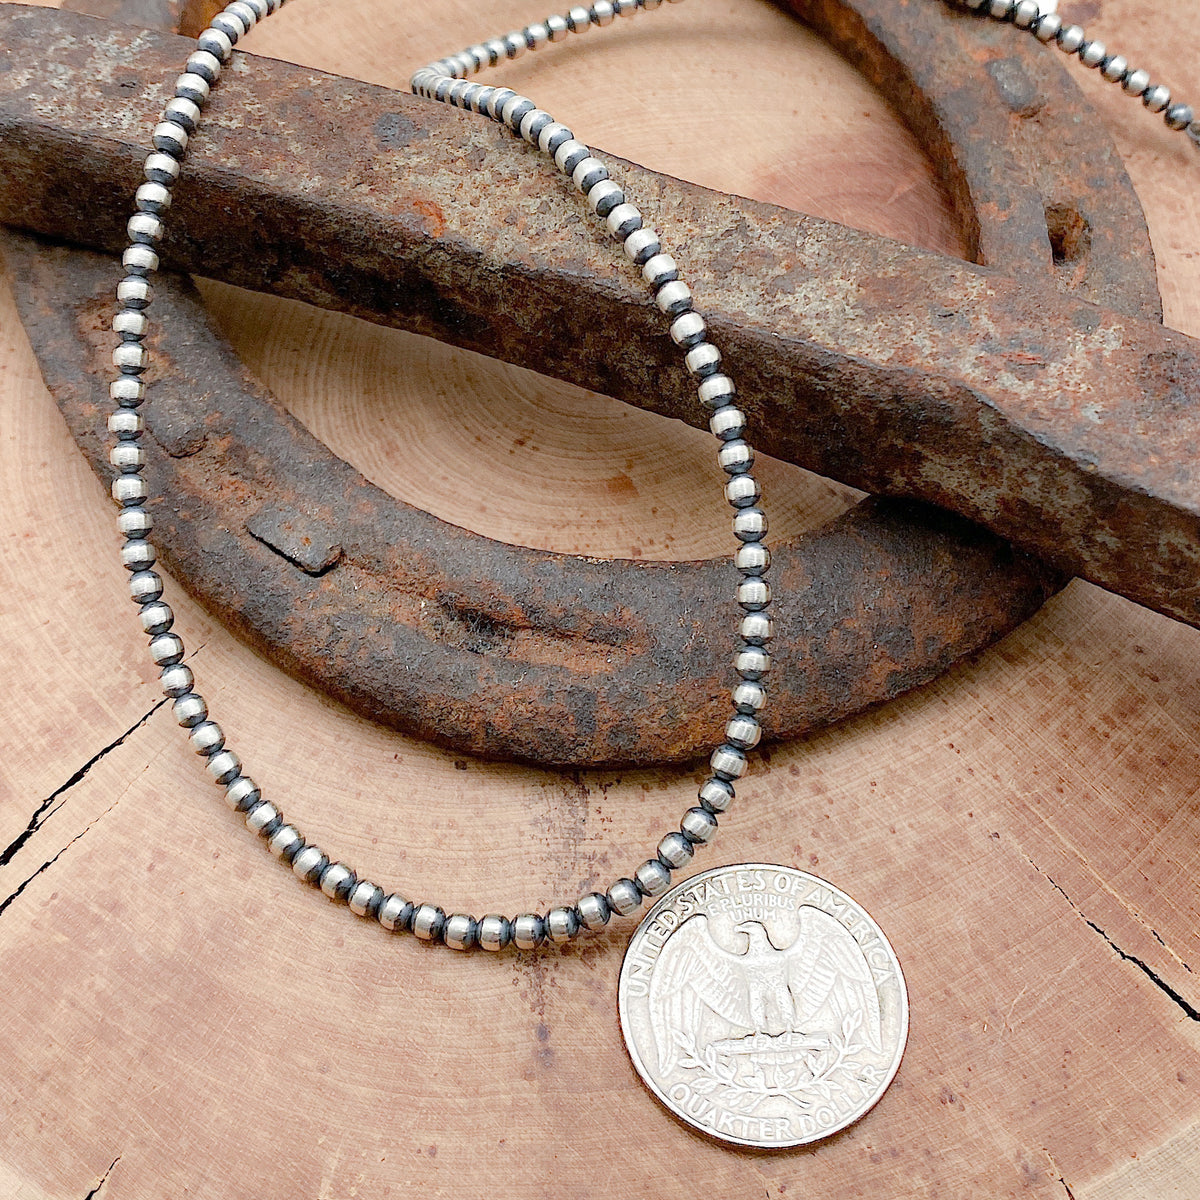 Size comparison of a US Quarter coin and a sterling silver hand crafted necklace that features 3mm beads an antiqued finish, and has a hook and eye clasp